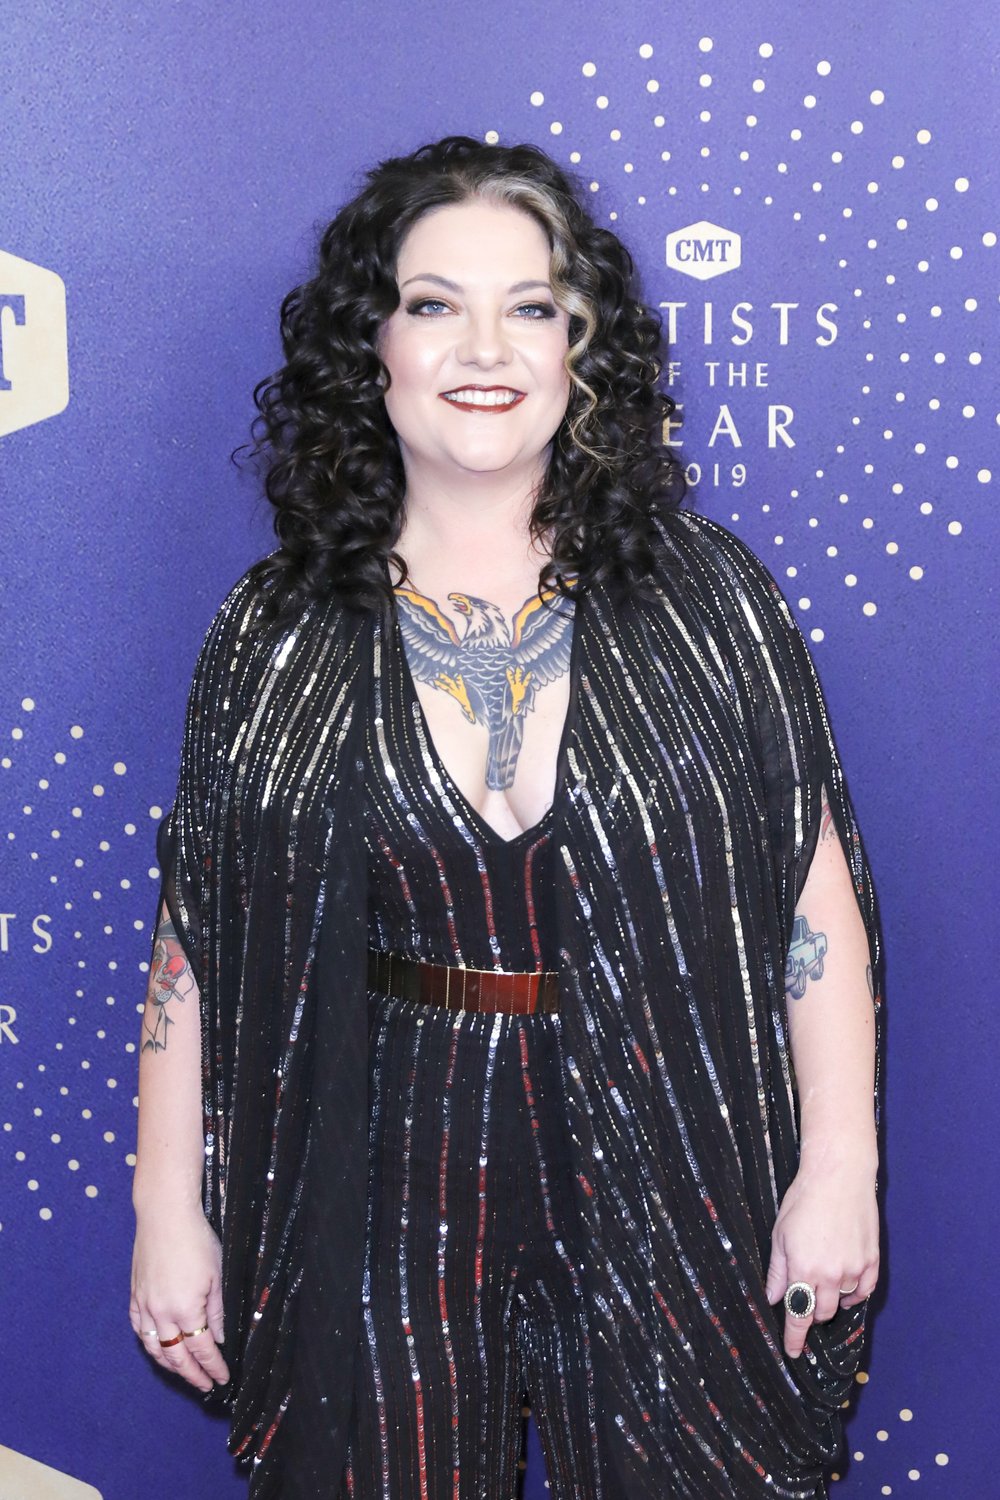 Ashley McBryde, the Arkansan and rising country music star, did a livestream concert recently and fans can still watch it on her website, ashleymcbryde.com.

(AP file photo/Invision/Al Wagner)